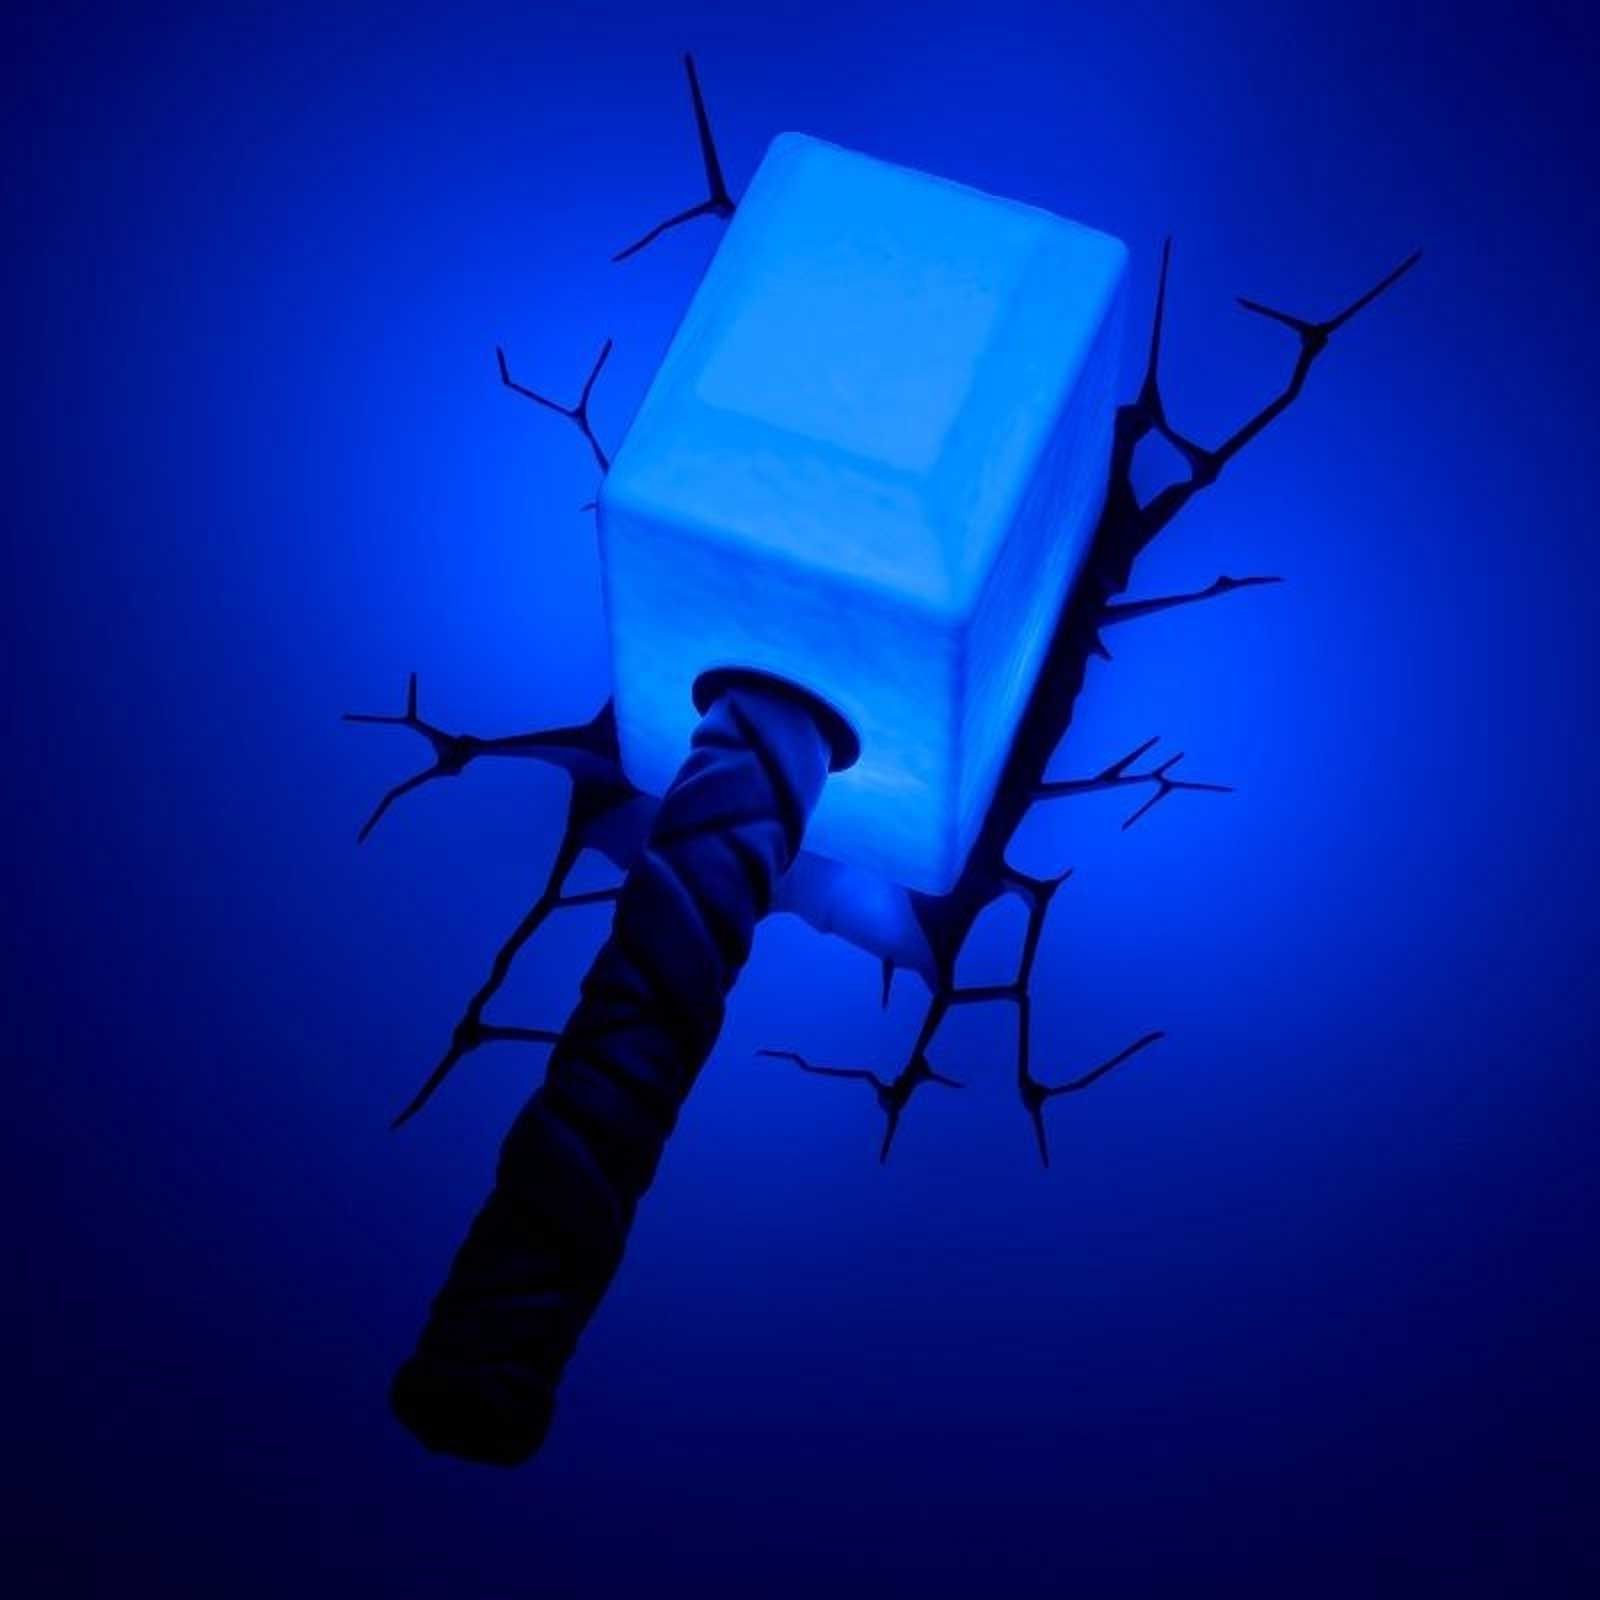 Well Known The Avengers 3d Wall Art Nightlight – Thor Hammer (View 14 of 15)